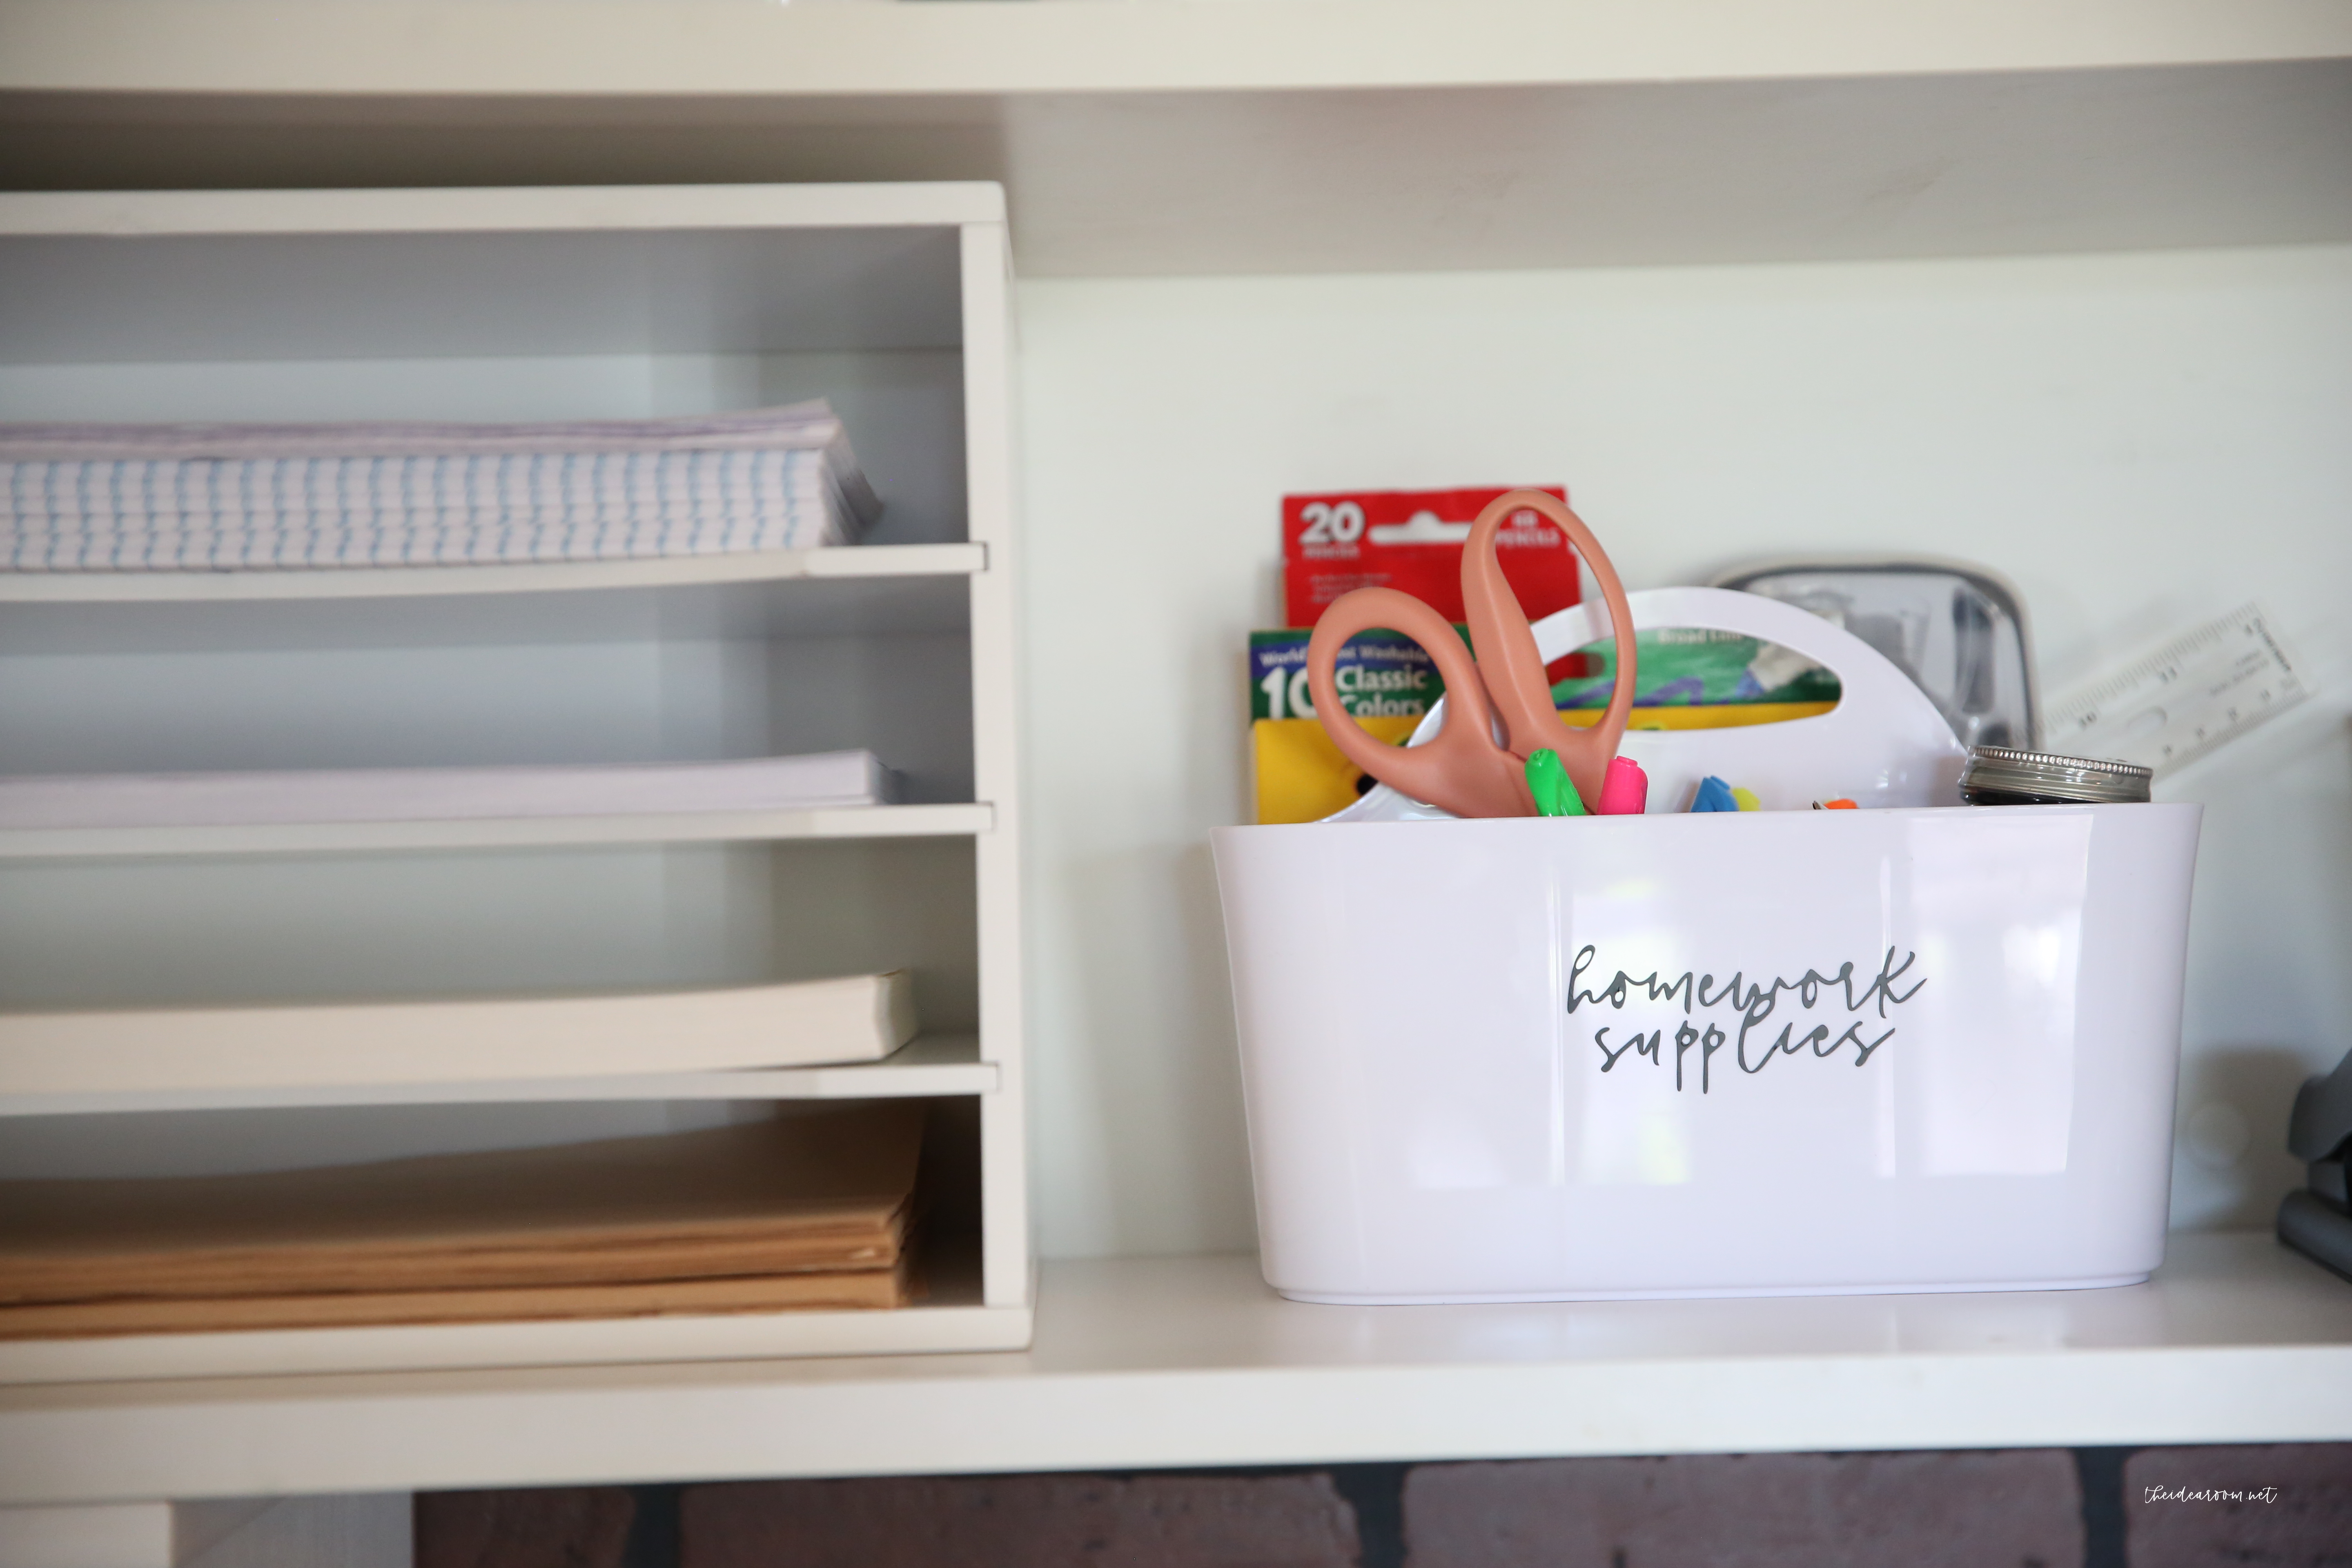 Household Item Organizer Find Stuff in Your Home Closet & Drawer Contents  Form Printable PDF 